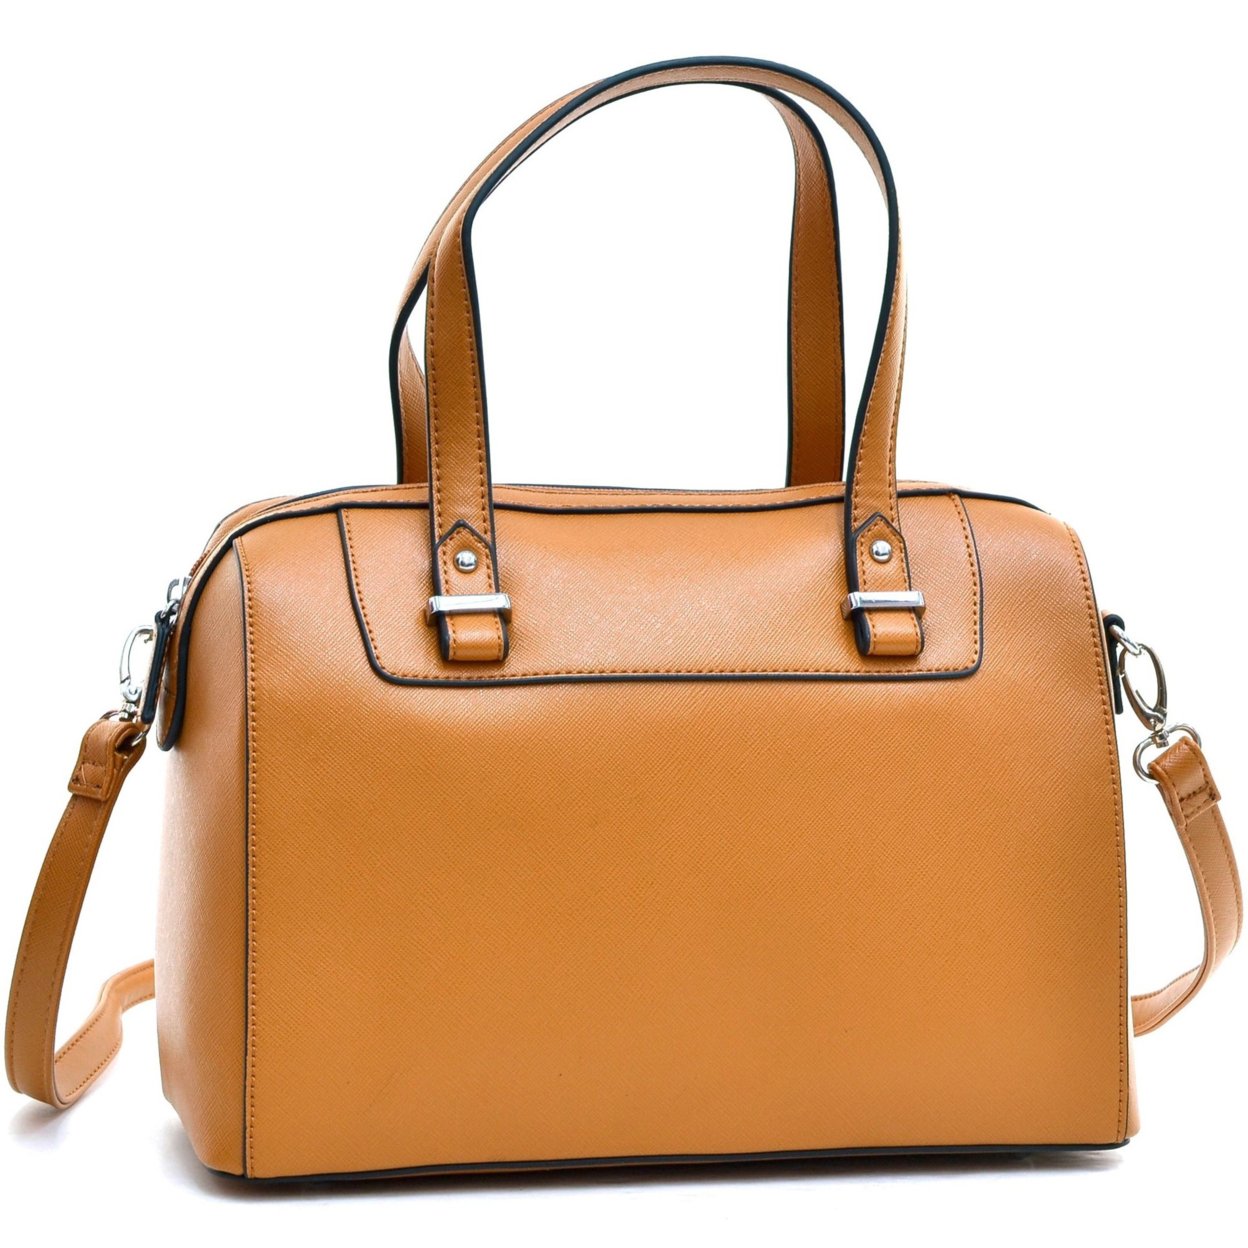 Buy Dasein Barrel Body Satchel with Removable Shoulder Strap by ...